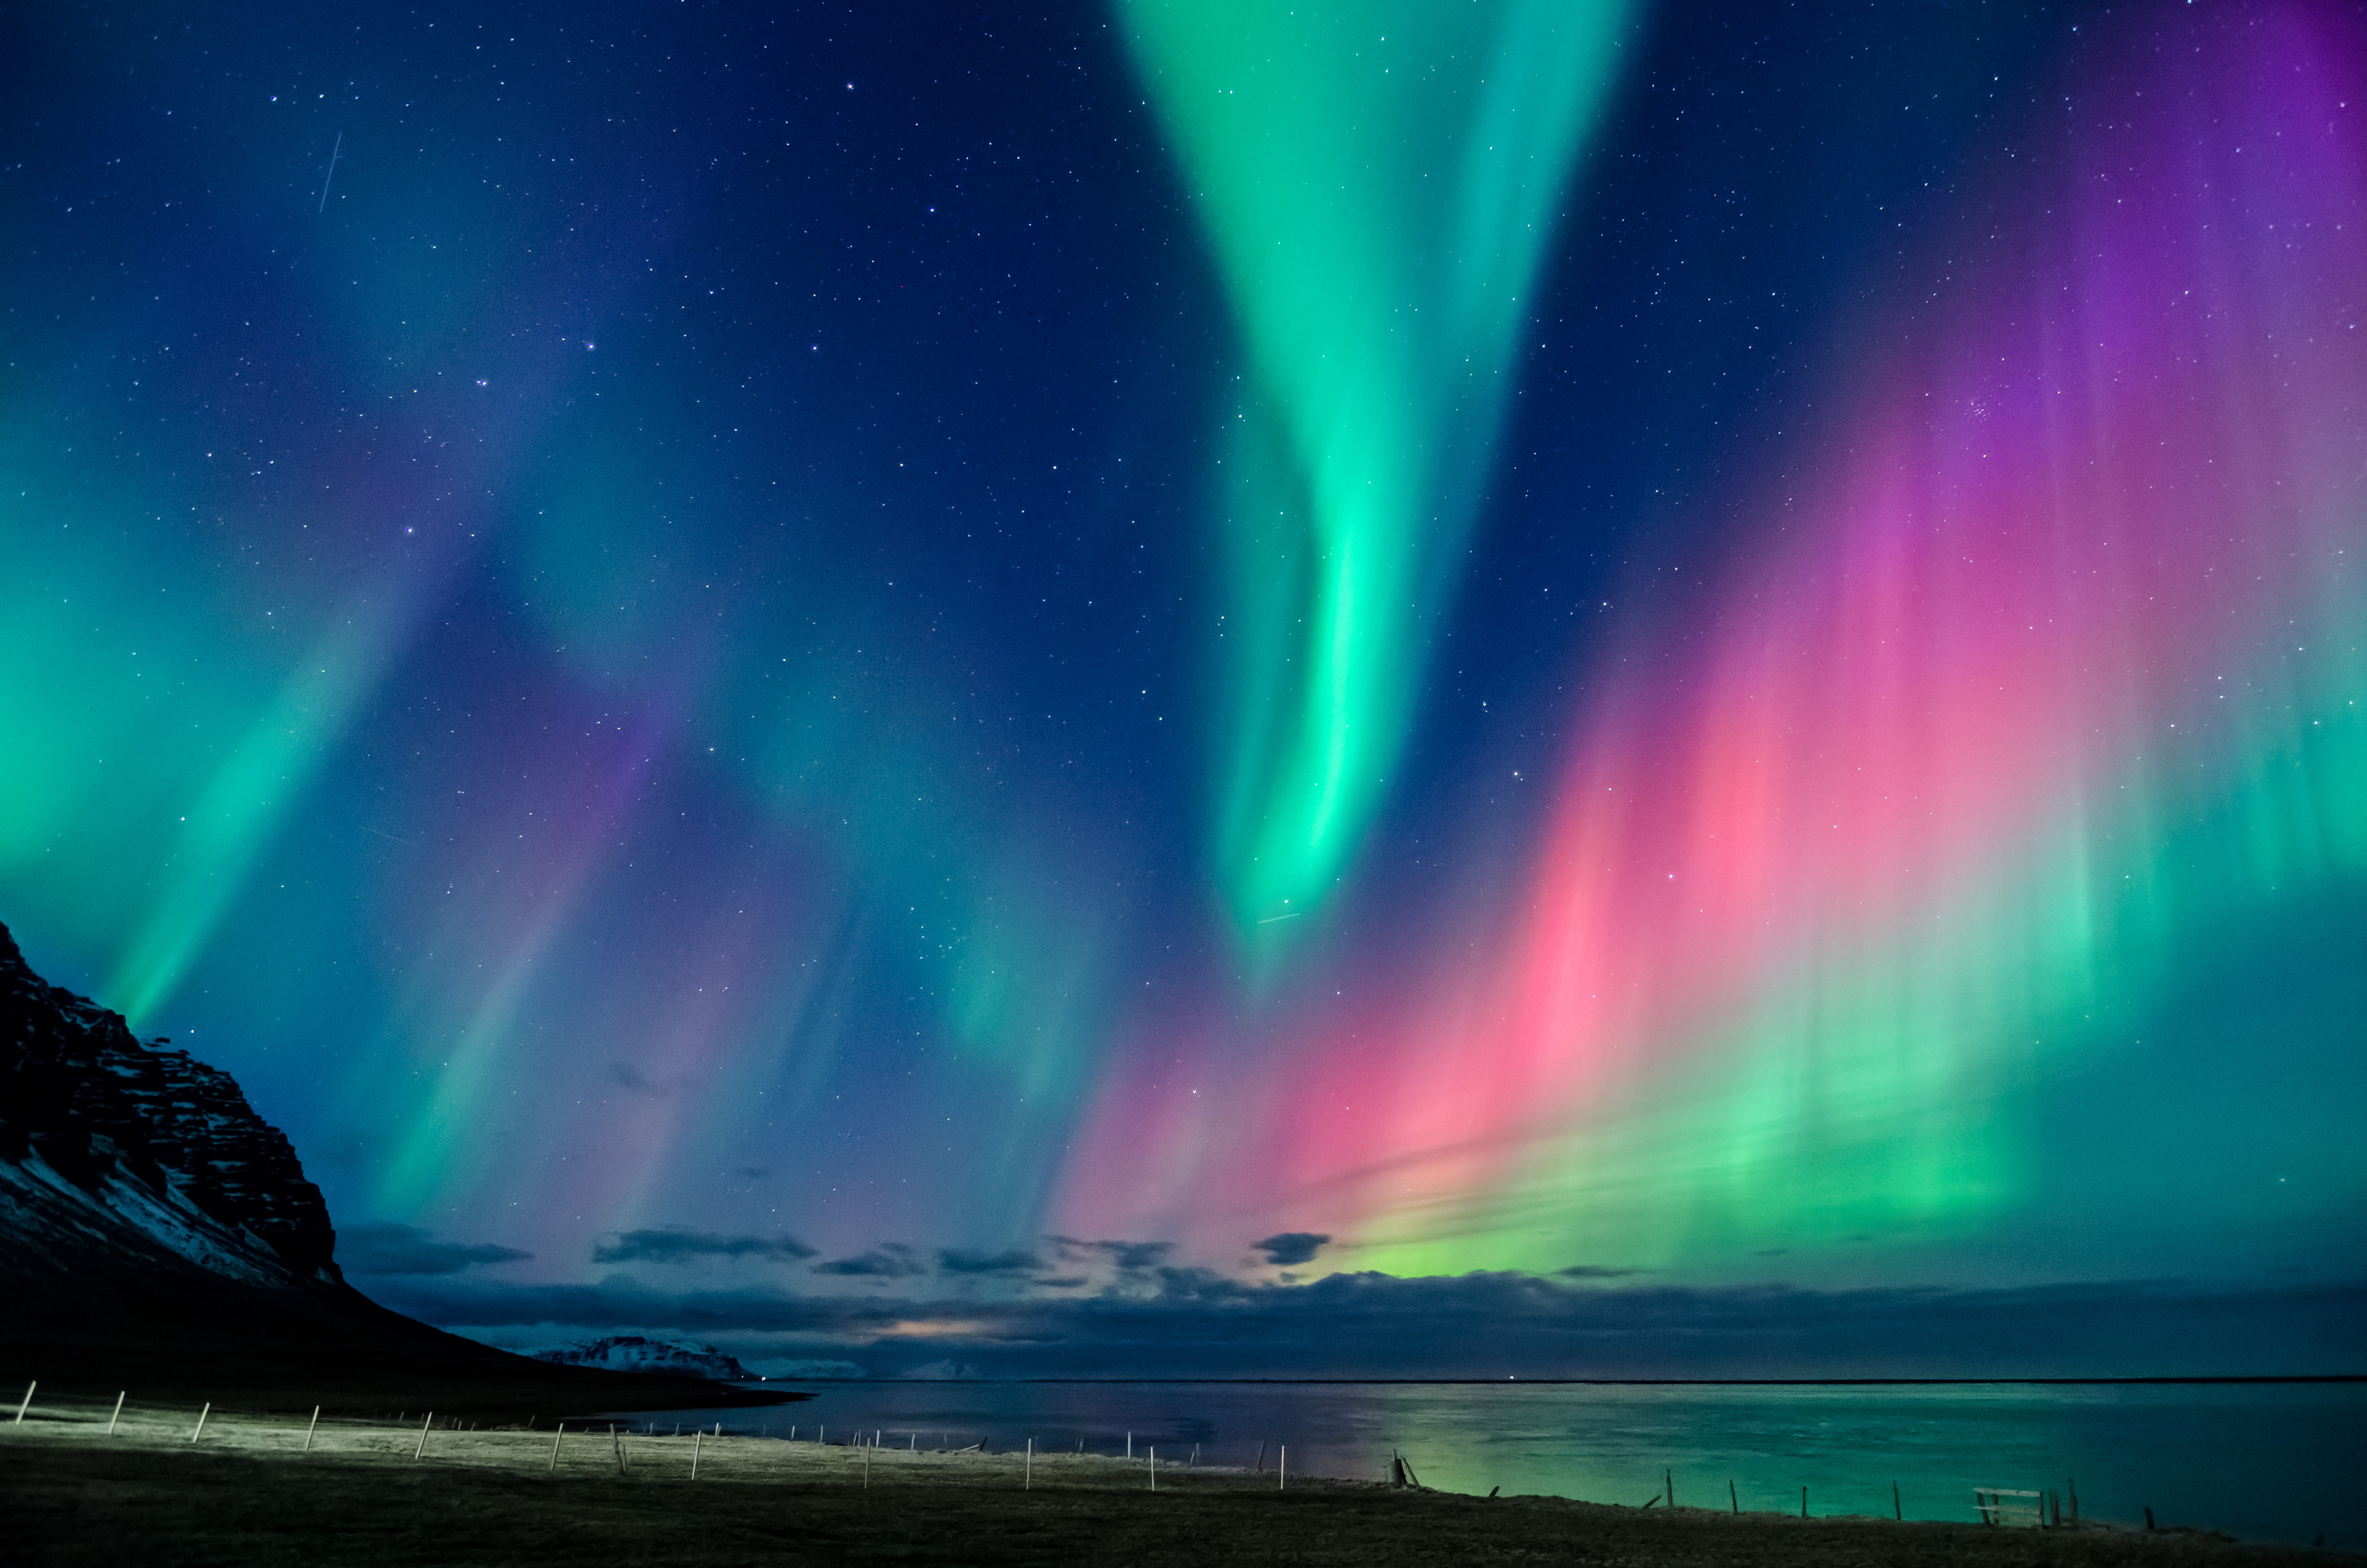 https://guidetoiceland.is/image/437199/x/0/northern-lights-in-all-the-colors-of-the-rainbow-dance-across-the-sky-in-iceland-6.jpg